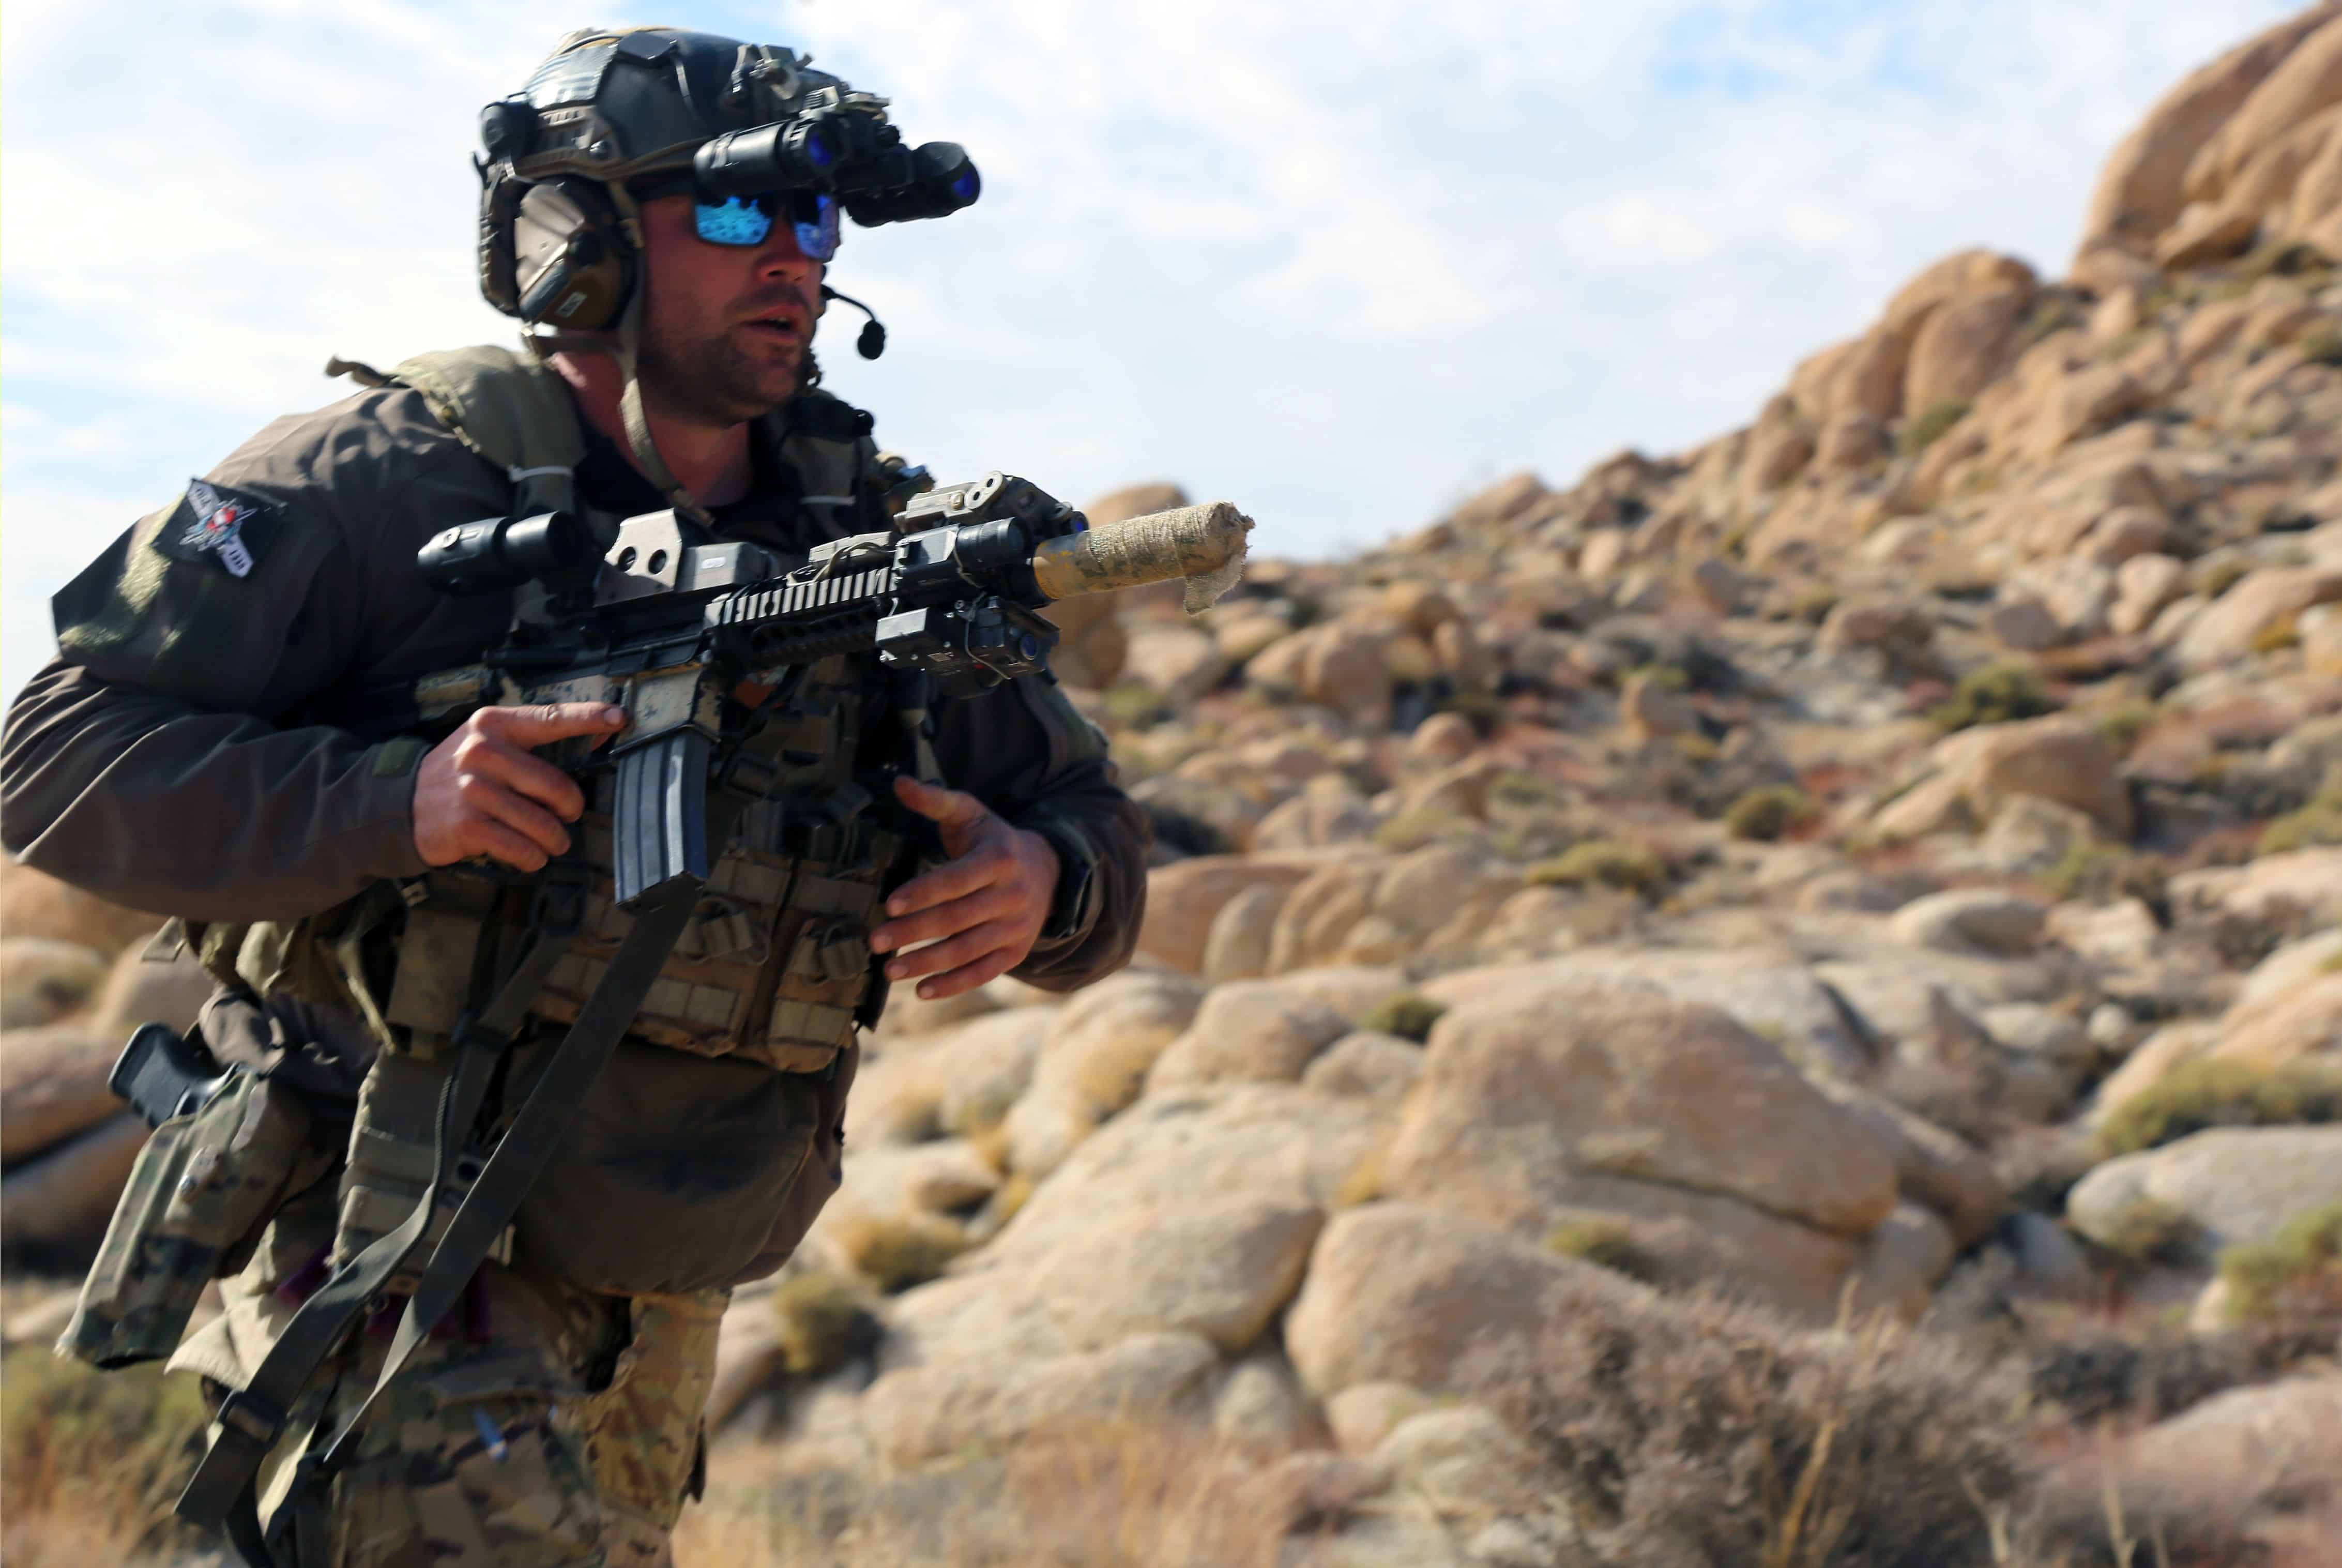 FORT IRWIN, Calif.- A U.S. Army Green Beret with 1st Special Forces Group (Airborne) maneuvers to counter an enemy attack during a notional ambush at the National Training Center, Fort Irwin, Calif., on March 17, 2021. The training exercises focused on the Green Berets